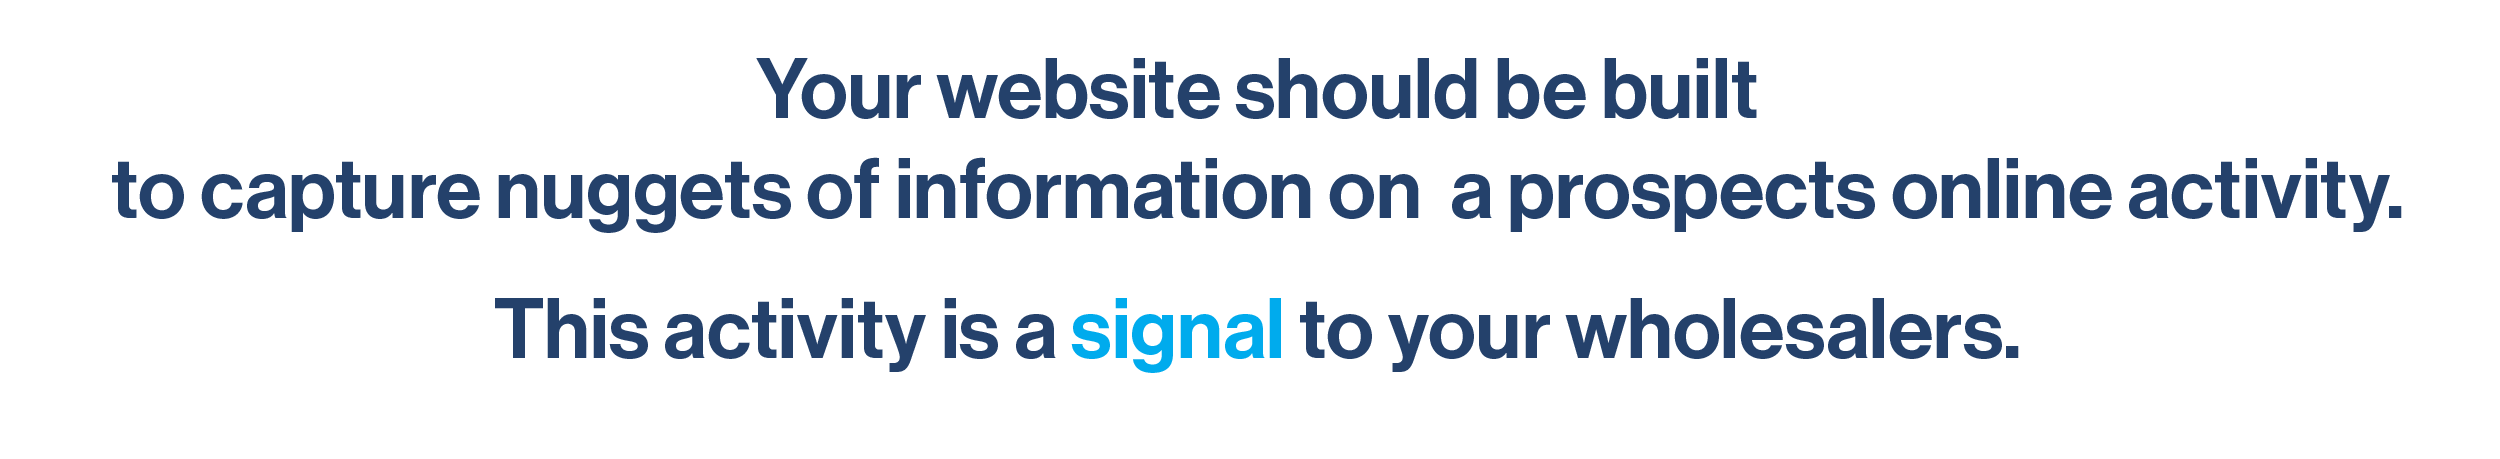 Why No Leads from My Website_Built for signal